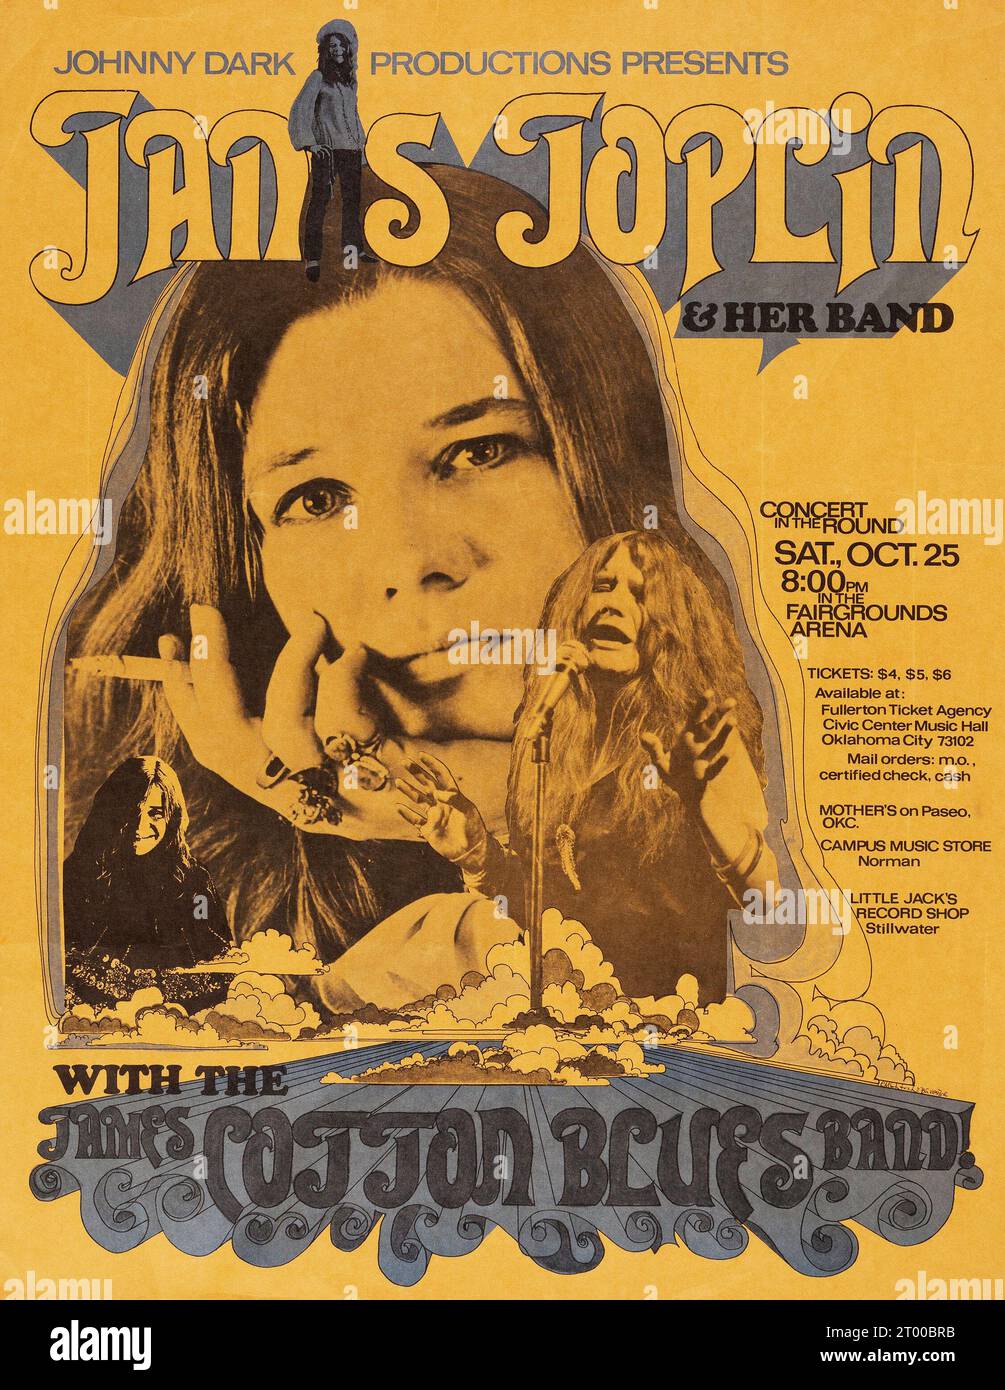 Janis Joplin & her band - 1969 Concert Poster with the James Cotton Blues Band - Fairgrounds Arena Stock Photo